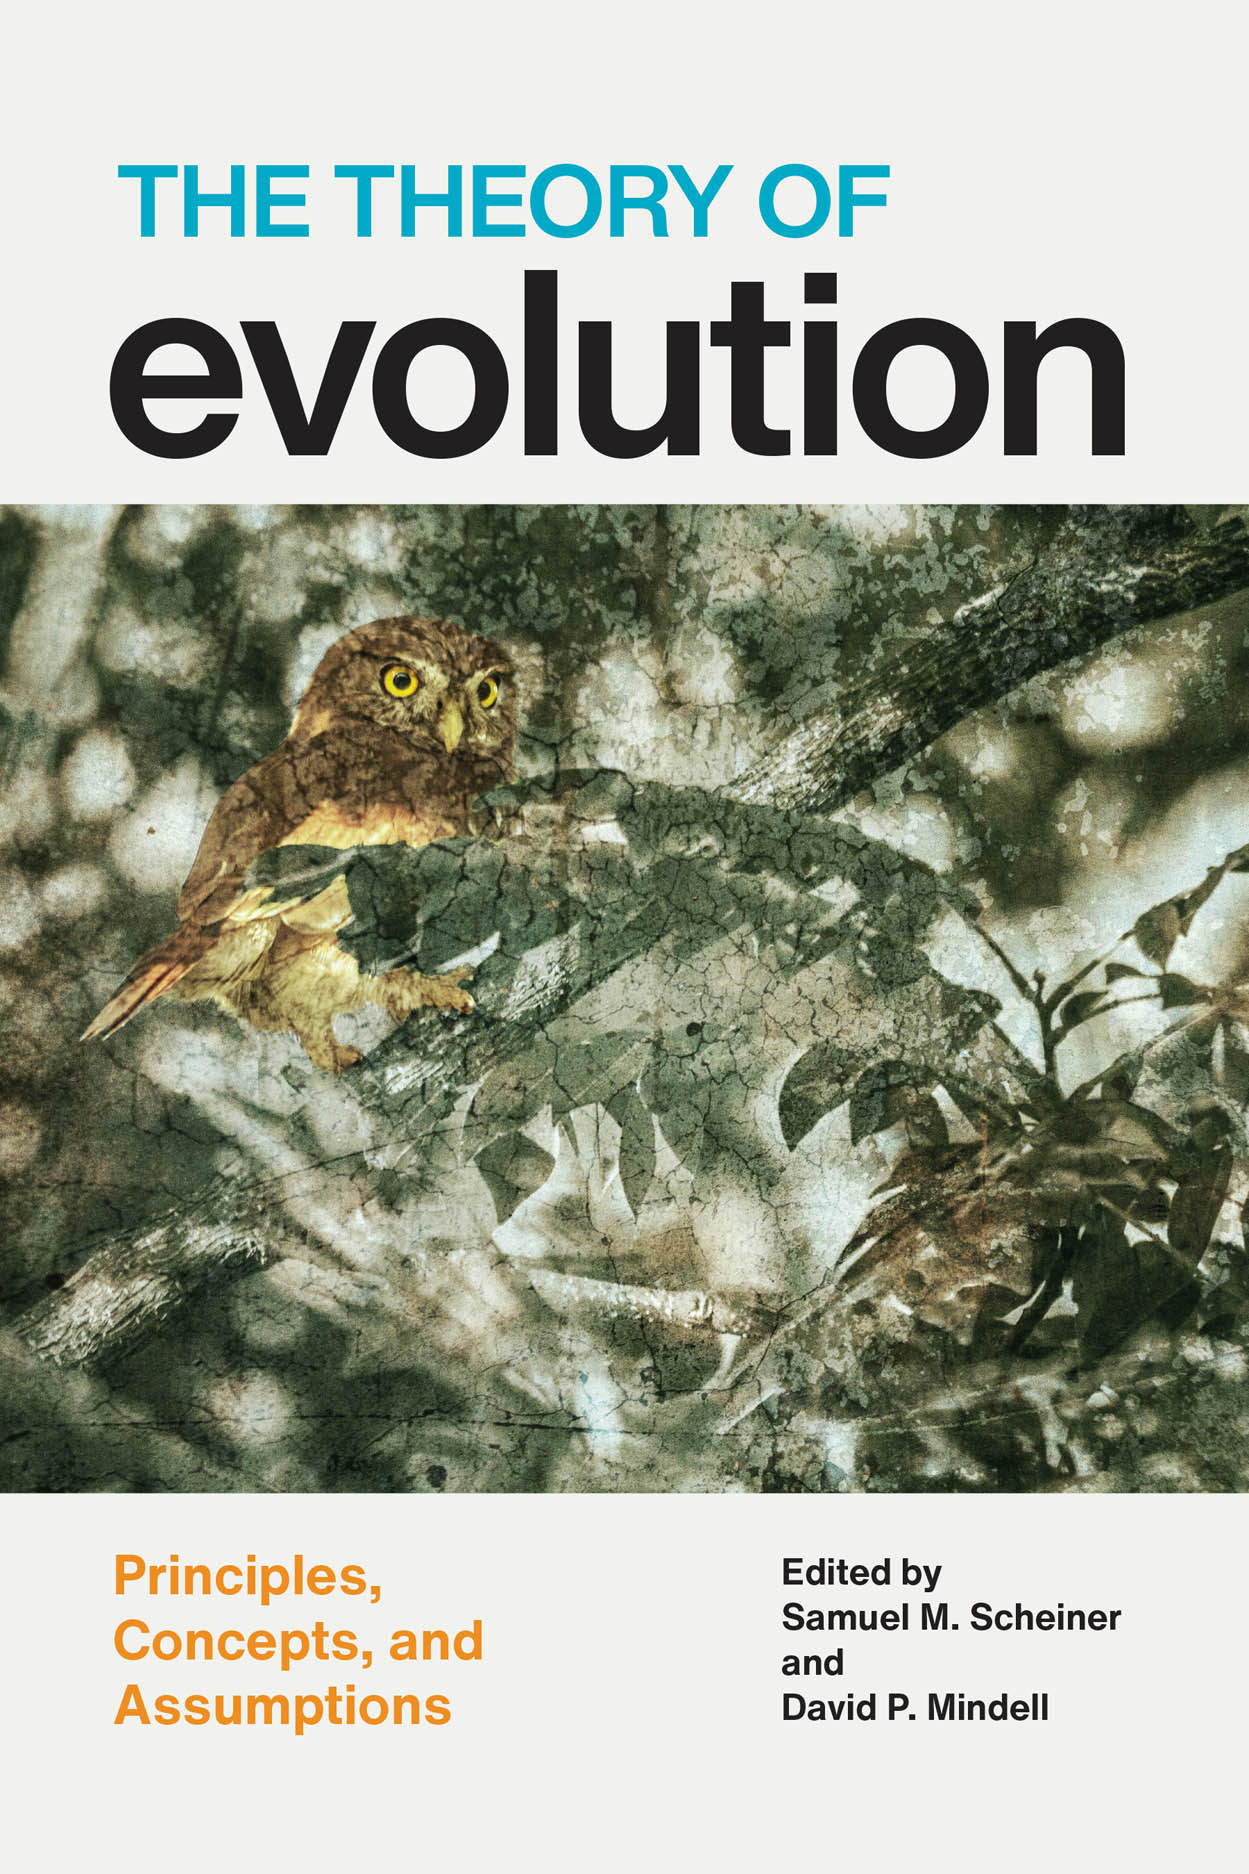 research papers on the theory of evolution